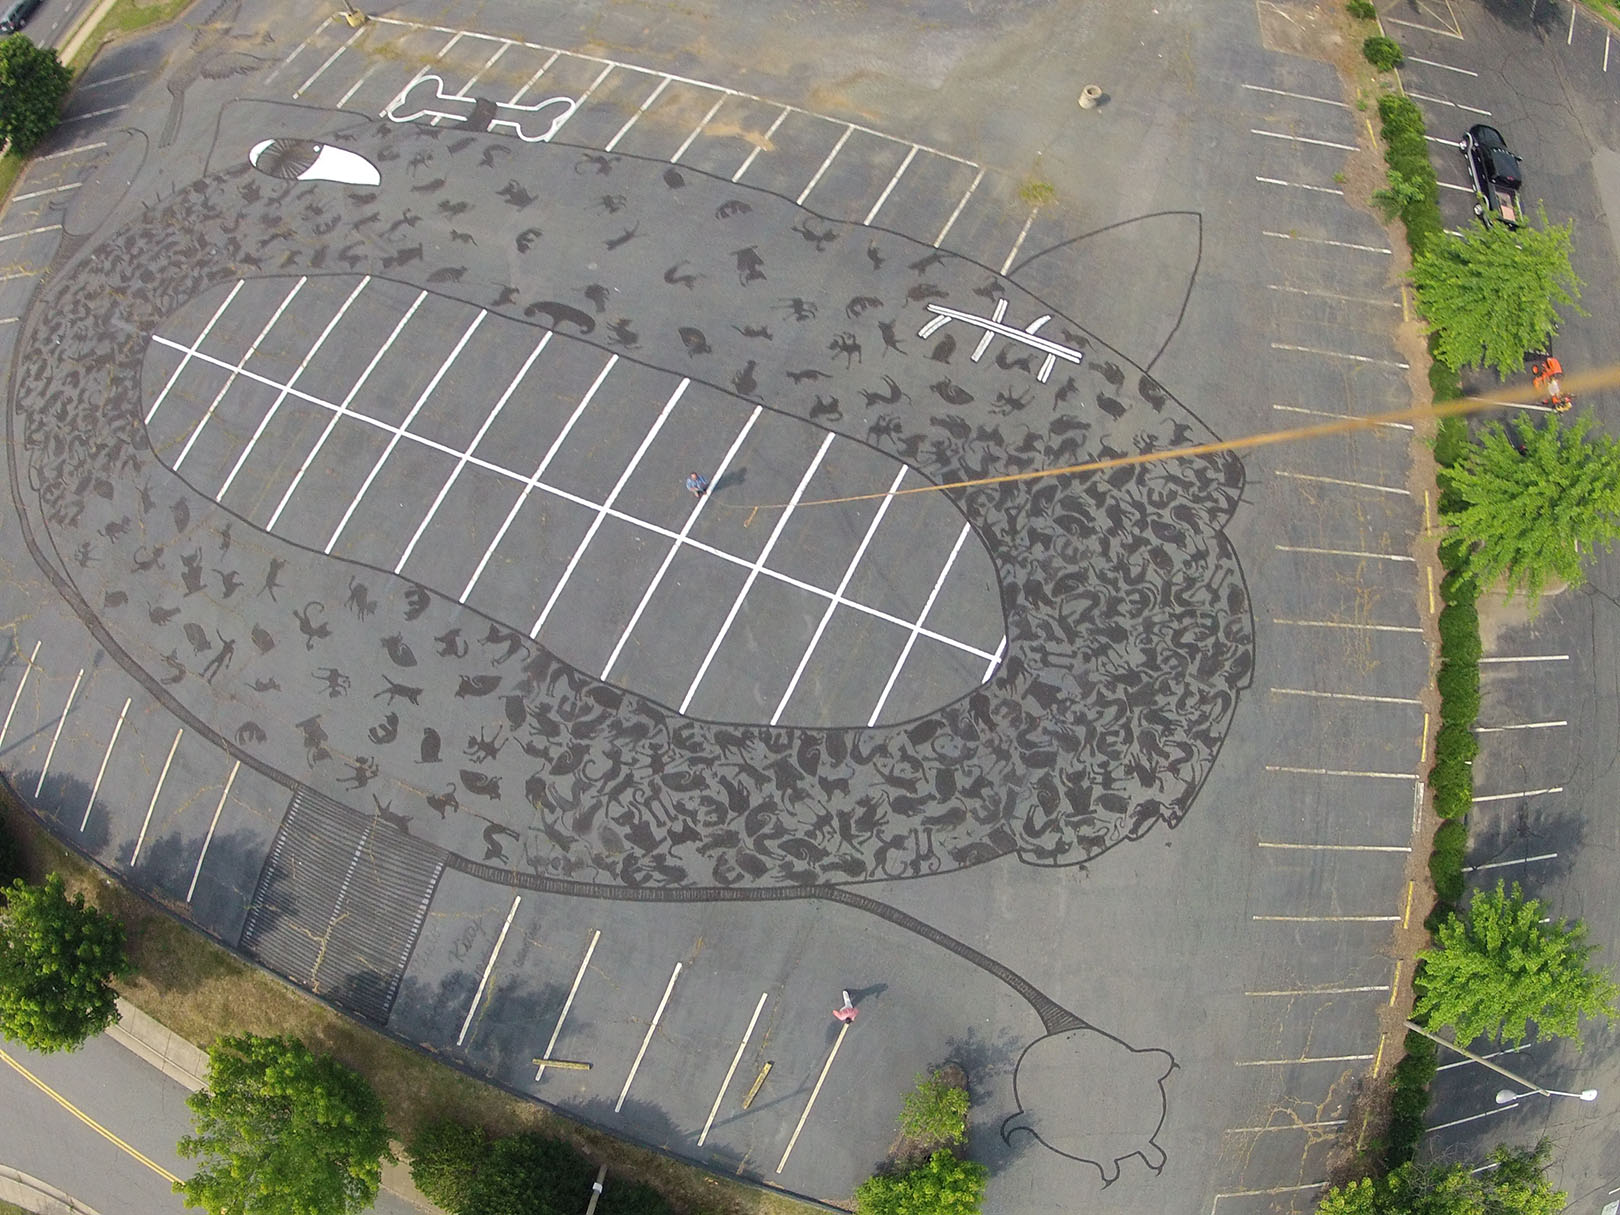 Aerial view of art work drawn on a parking lot